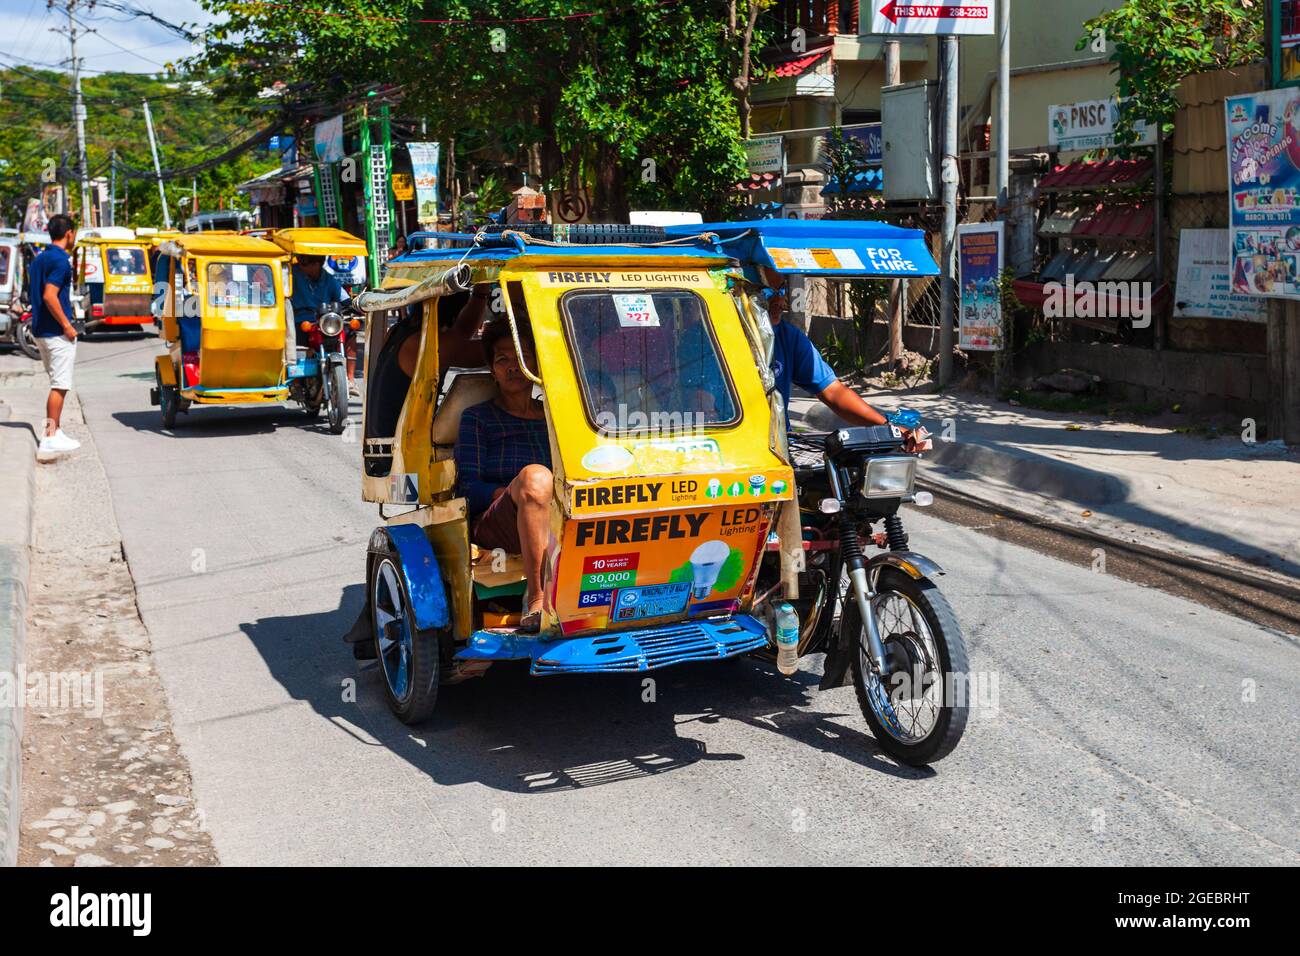 BORACAY, PHILIPPINES - MARCH 04, 2013: Tricycle at the main street in Boracay island. Tricycle is a very popular public taxi transport in Philippines. Stock Photo